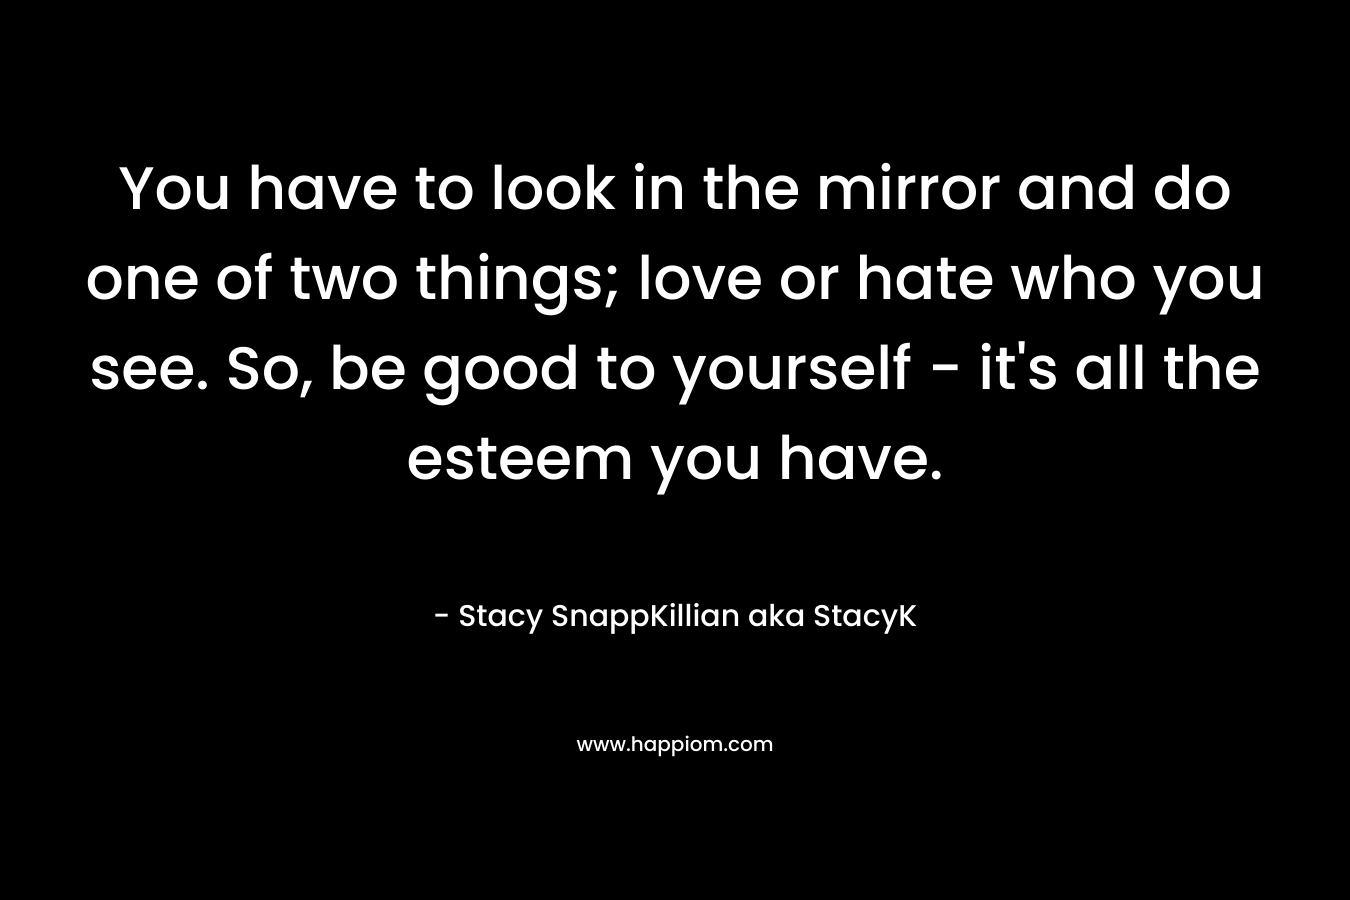 You have to look in the mirror and do one of two things; love or hate who you see. So, be good to yourself – it’s all the esteem you have. – Stacy SnappKillian aka StacyK